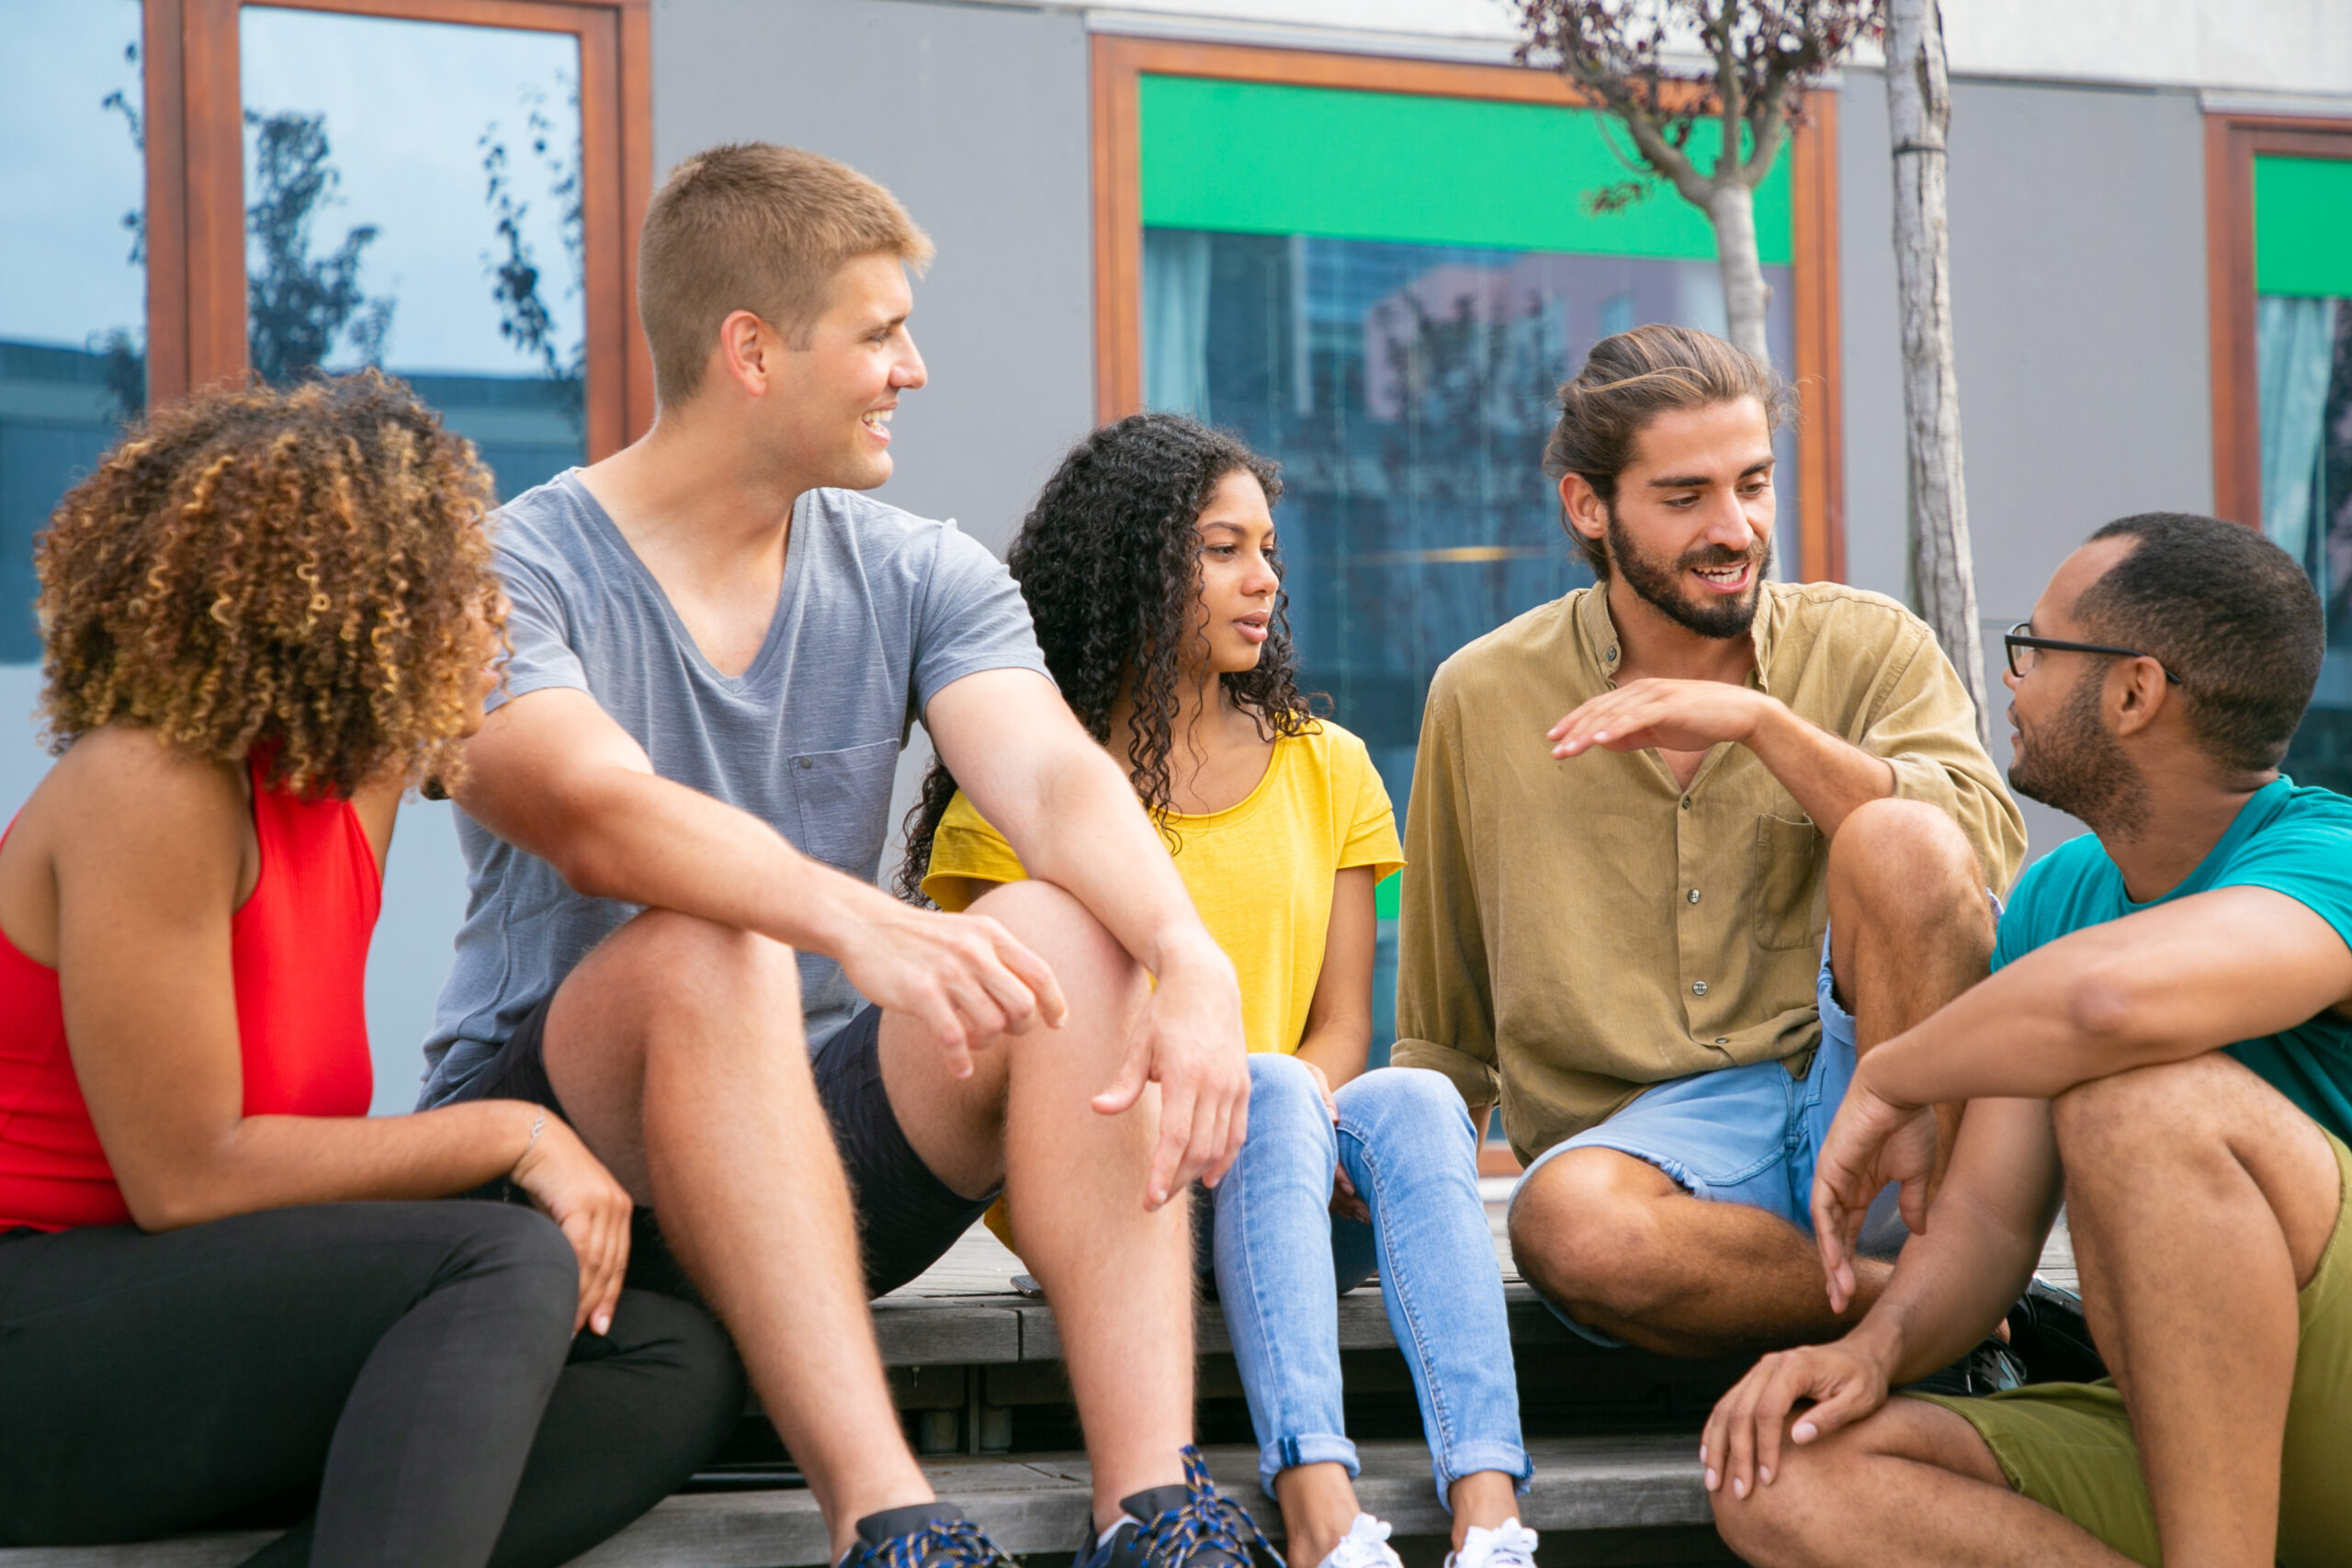 Content young friends sitting on steps. Cheerful young multiethnic men and women sitting together on street and interacting. Friendship concept